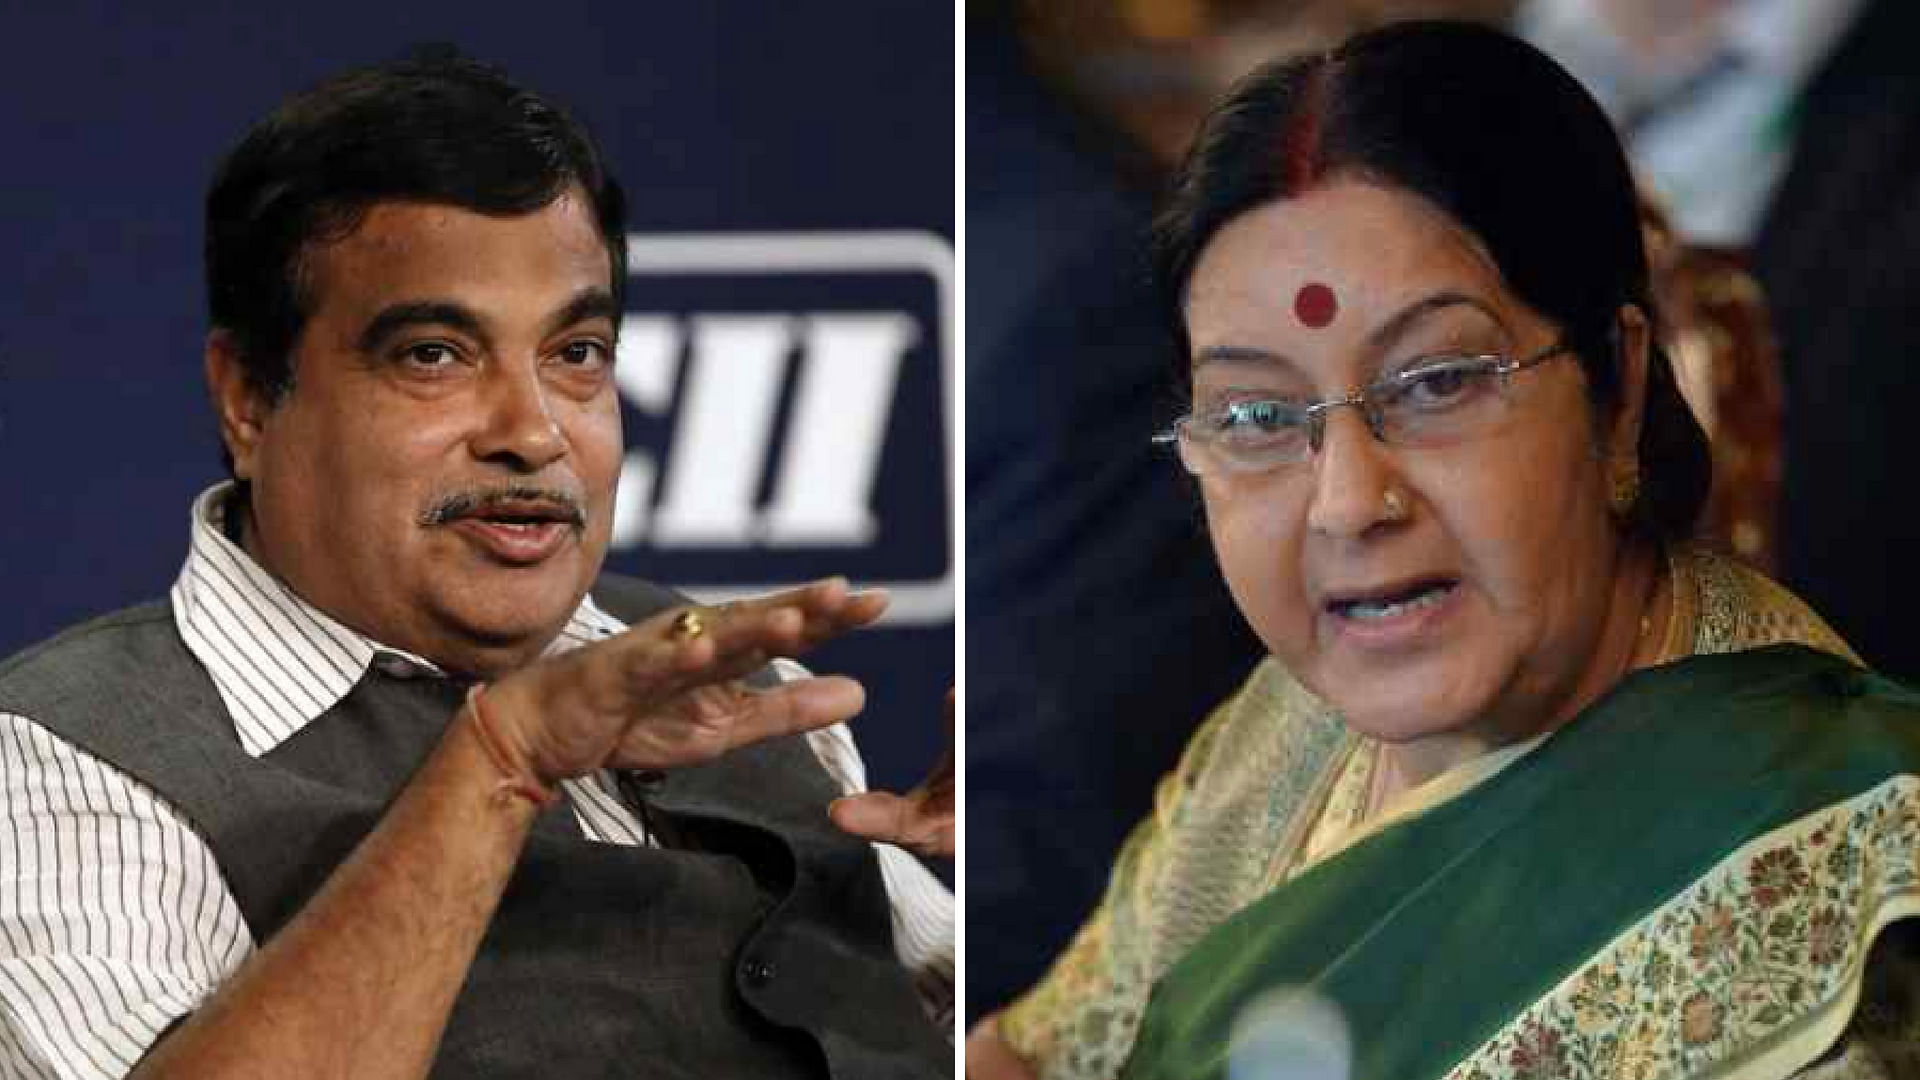 Nitin Gadkari said that the decision to issue fresh passport to the inter-faith couple was not wrong.